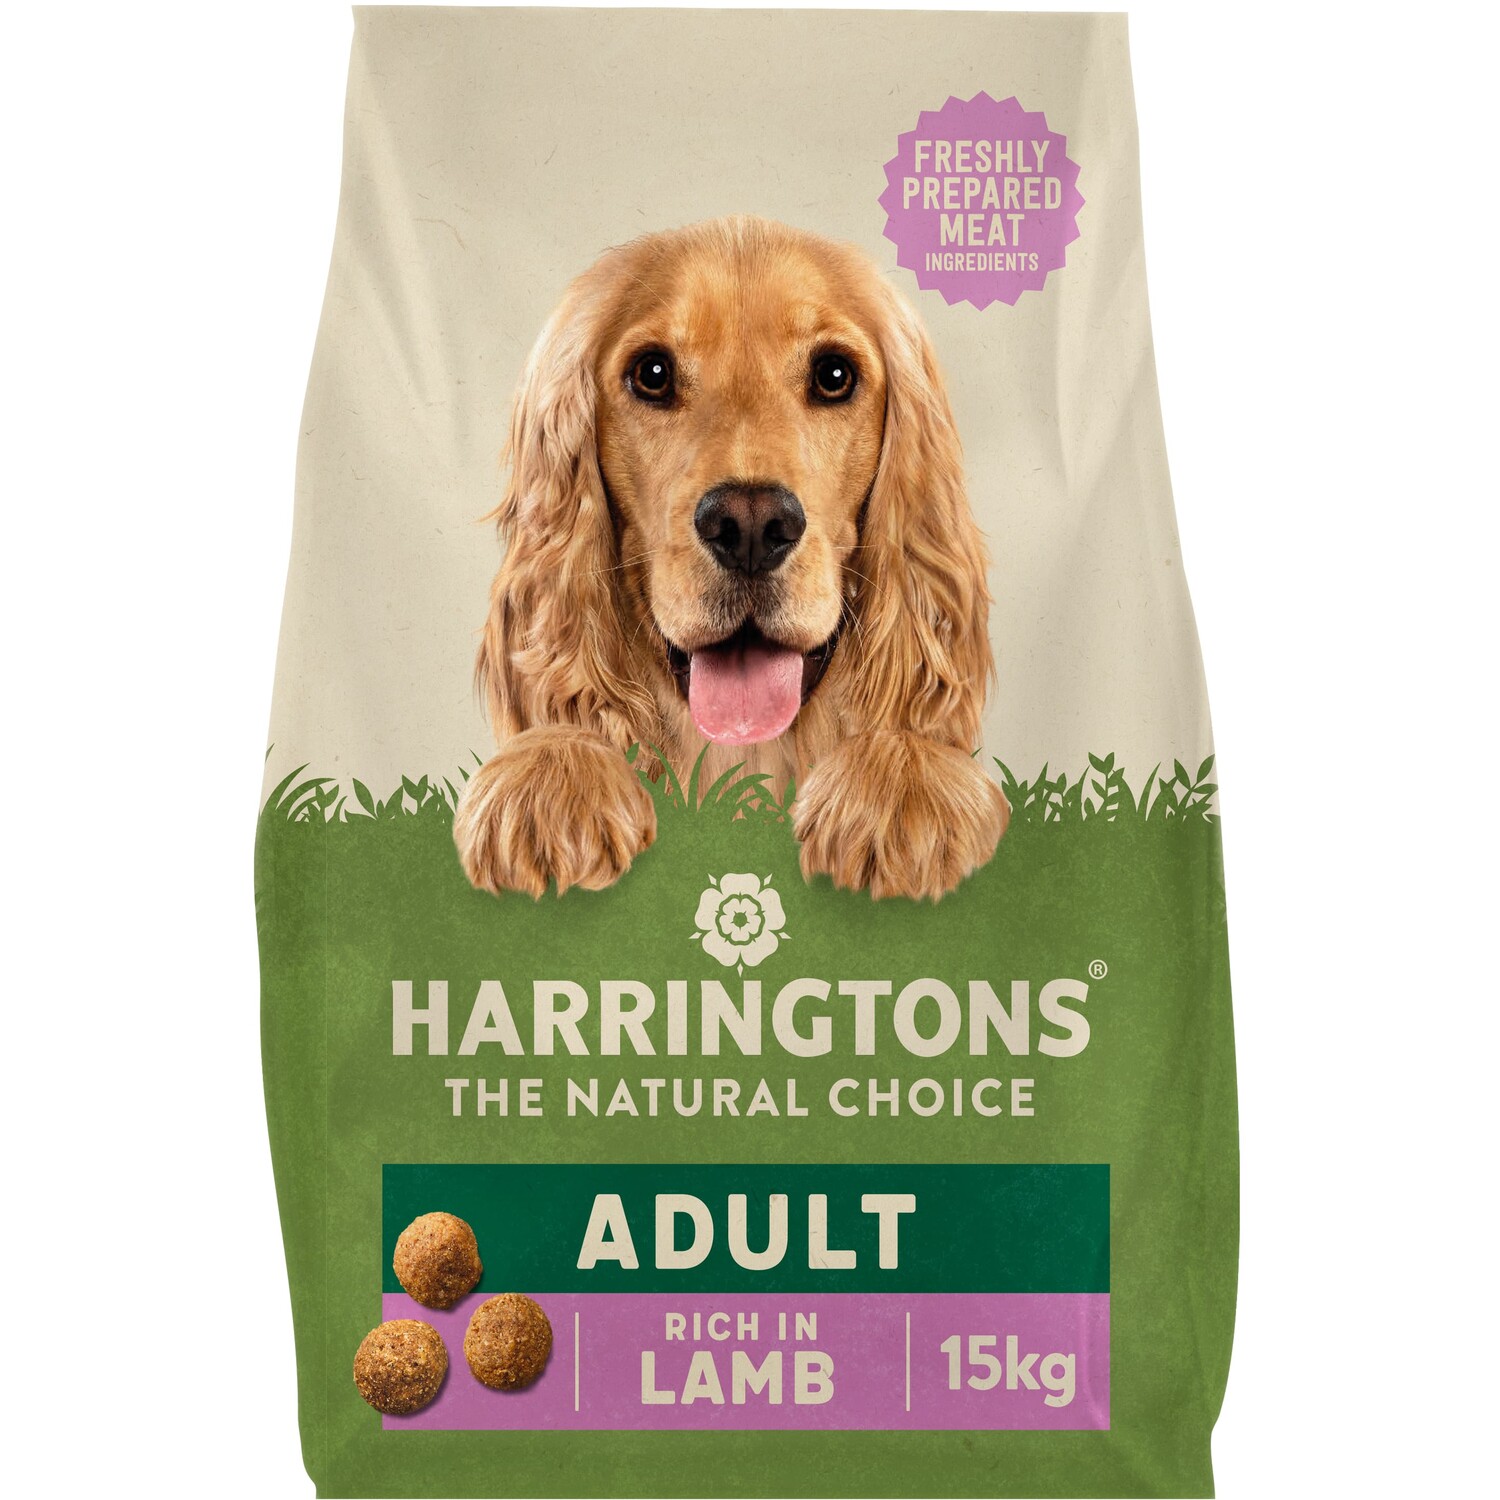 Harringtons The Natural Choice Rich in Lamb Complete Dog Food 15kg Image 1